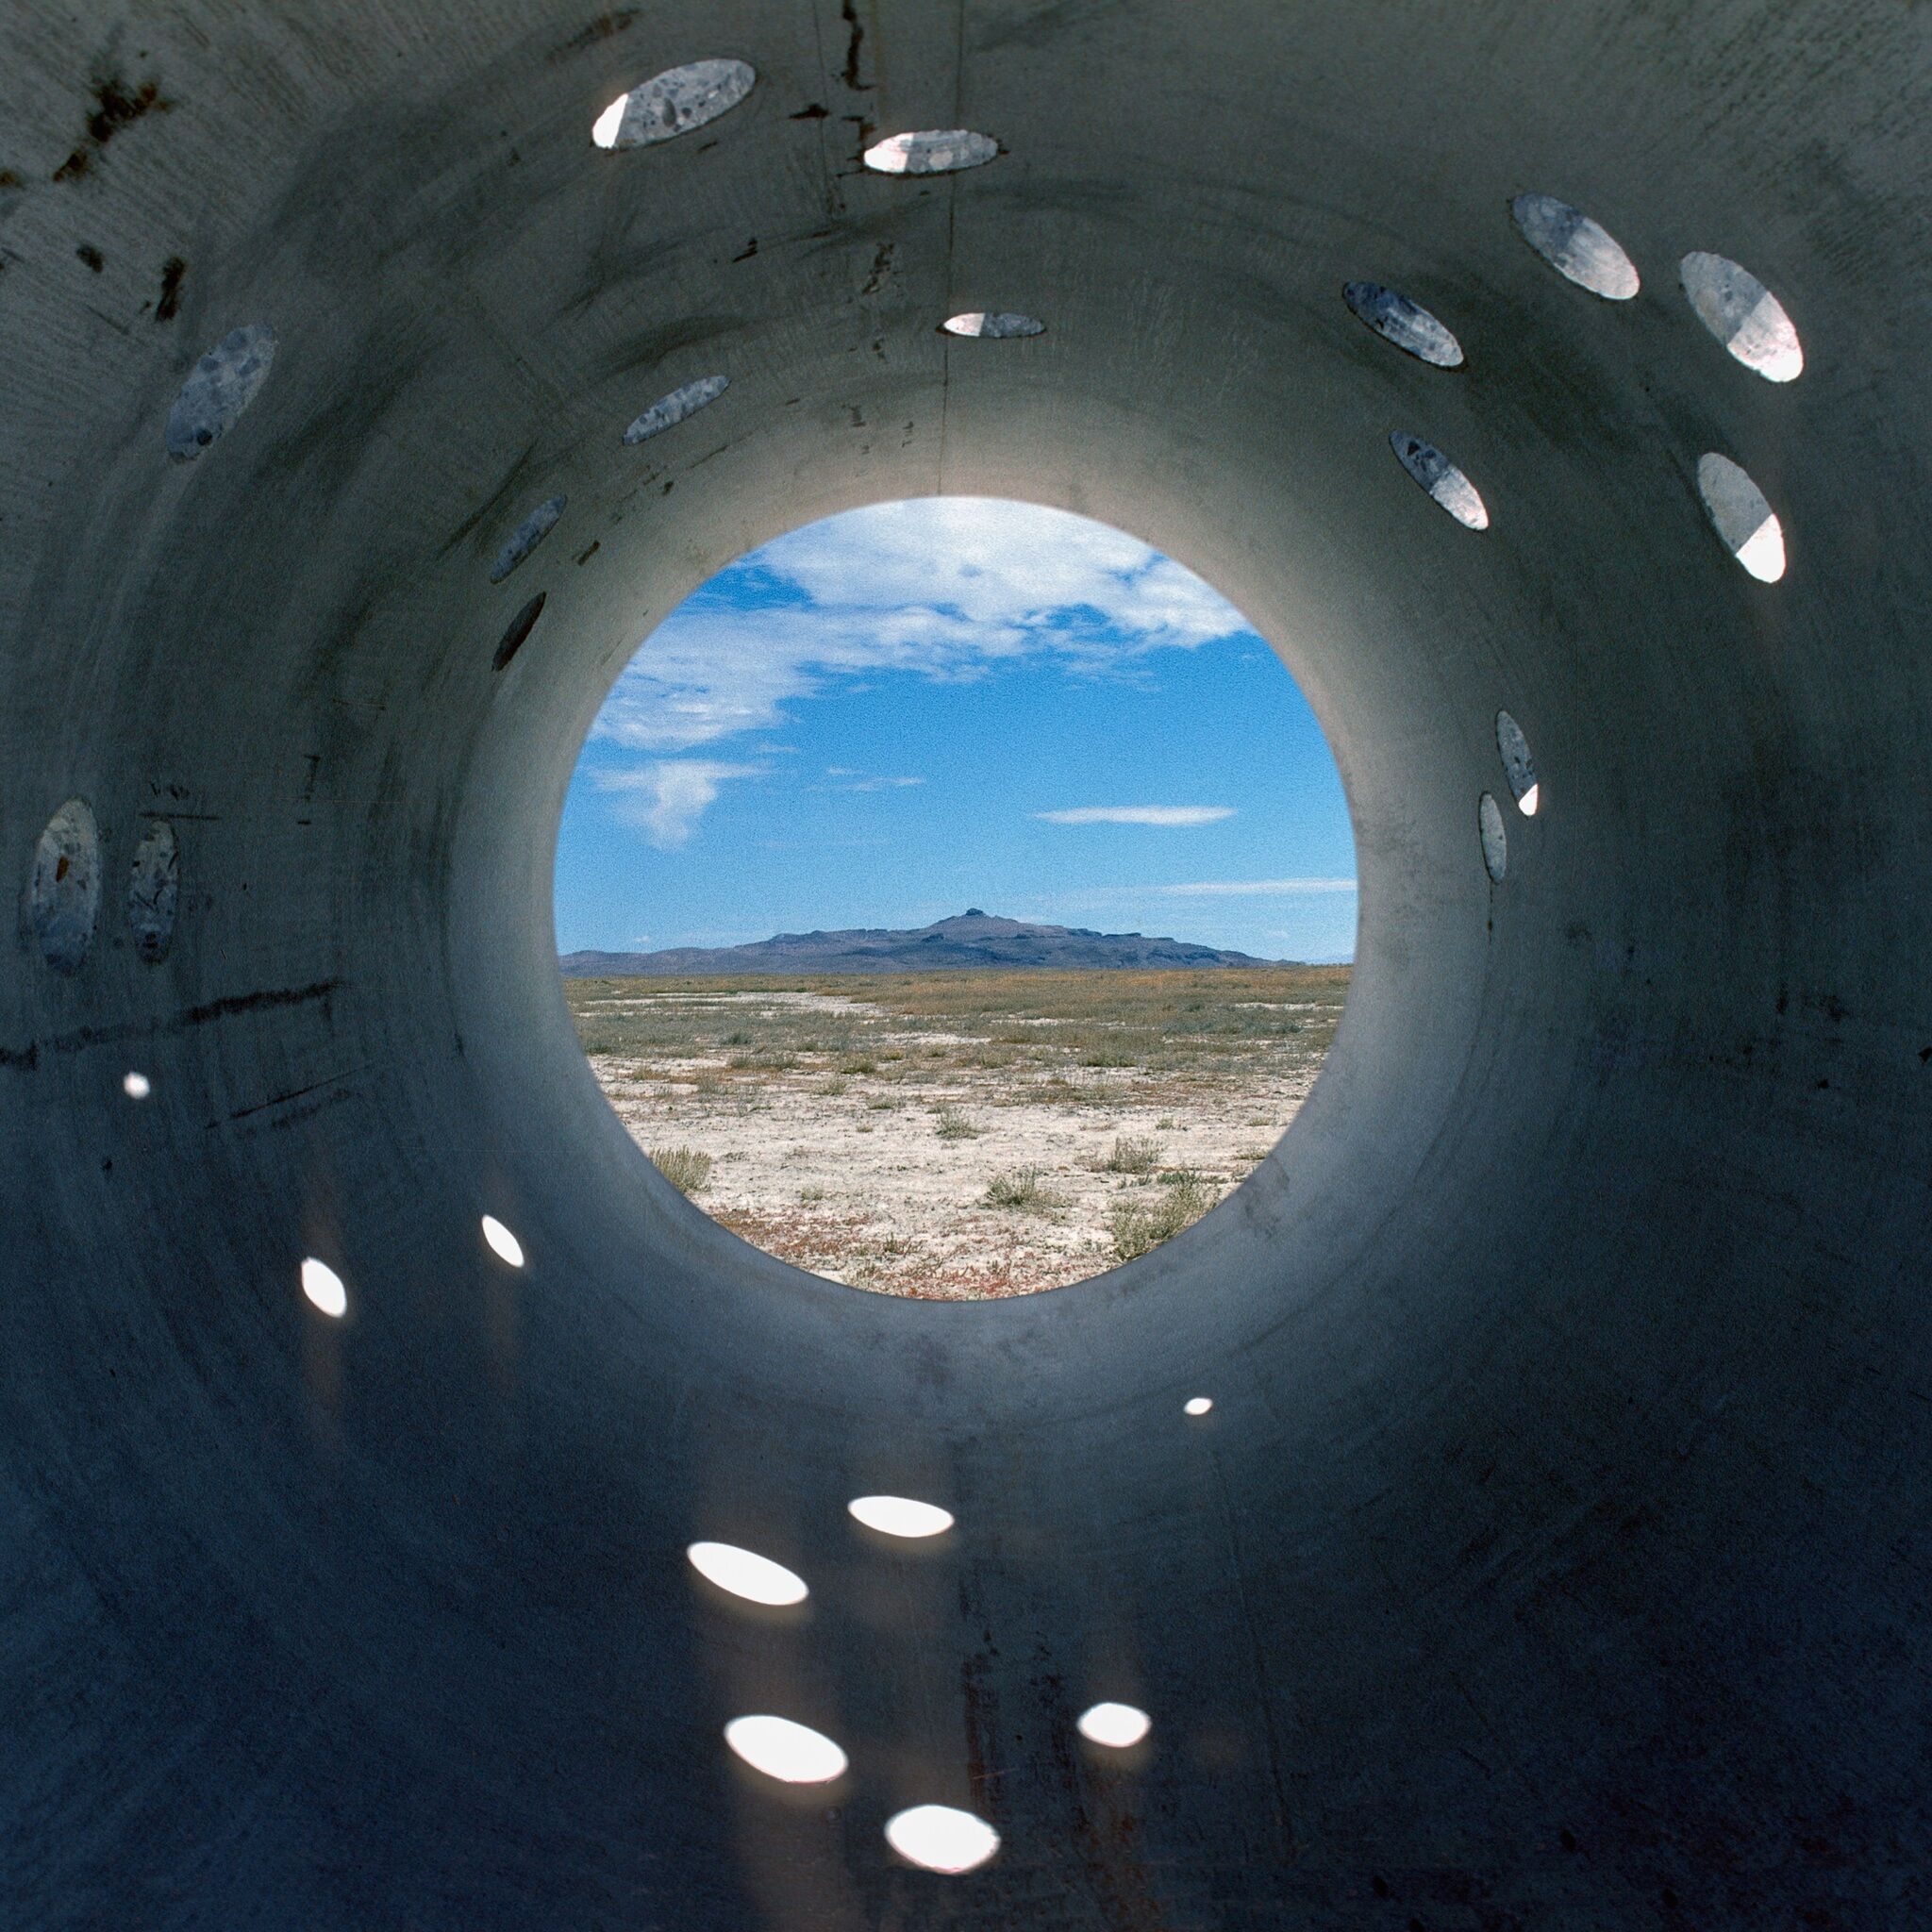 A photograph from inside a large steel tube with a direct view of mountains in the distance.